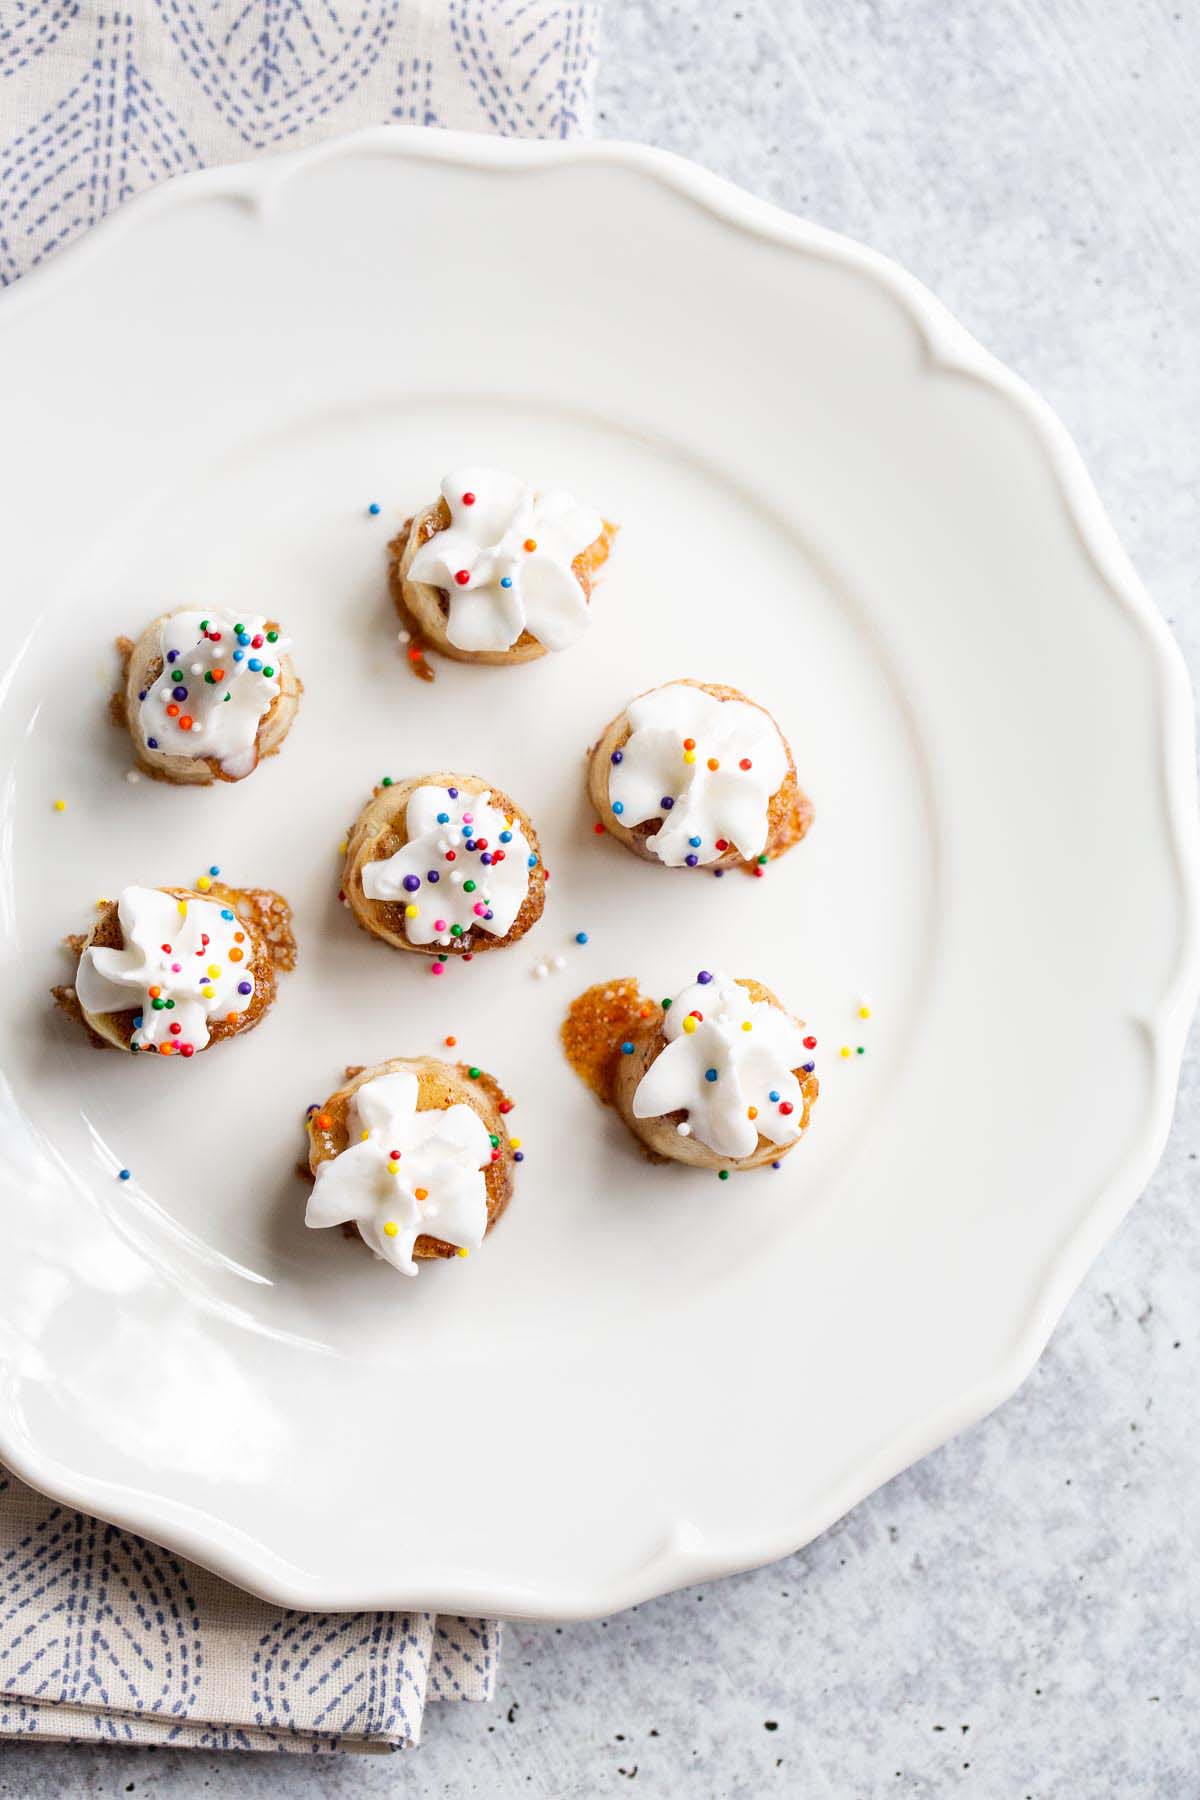 Banana bites with whipped cream and sprinkles from above